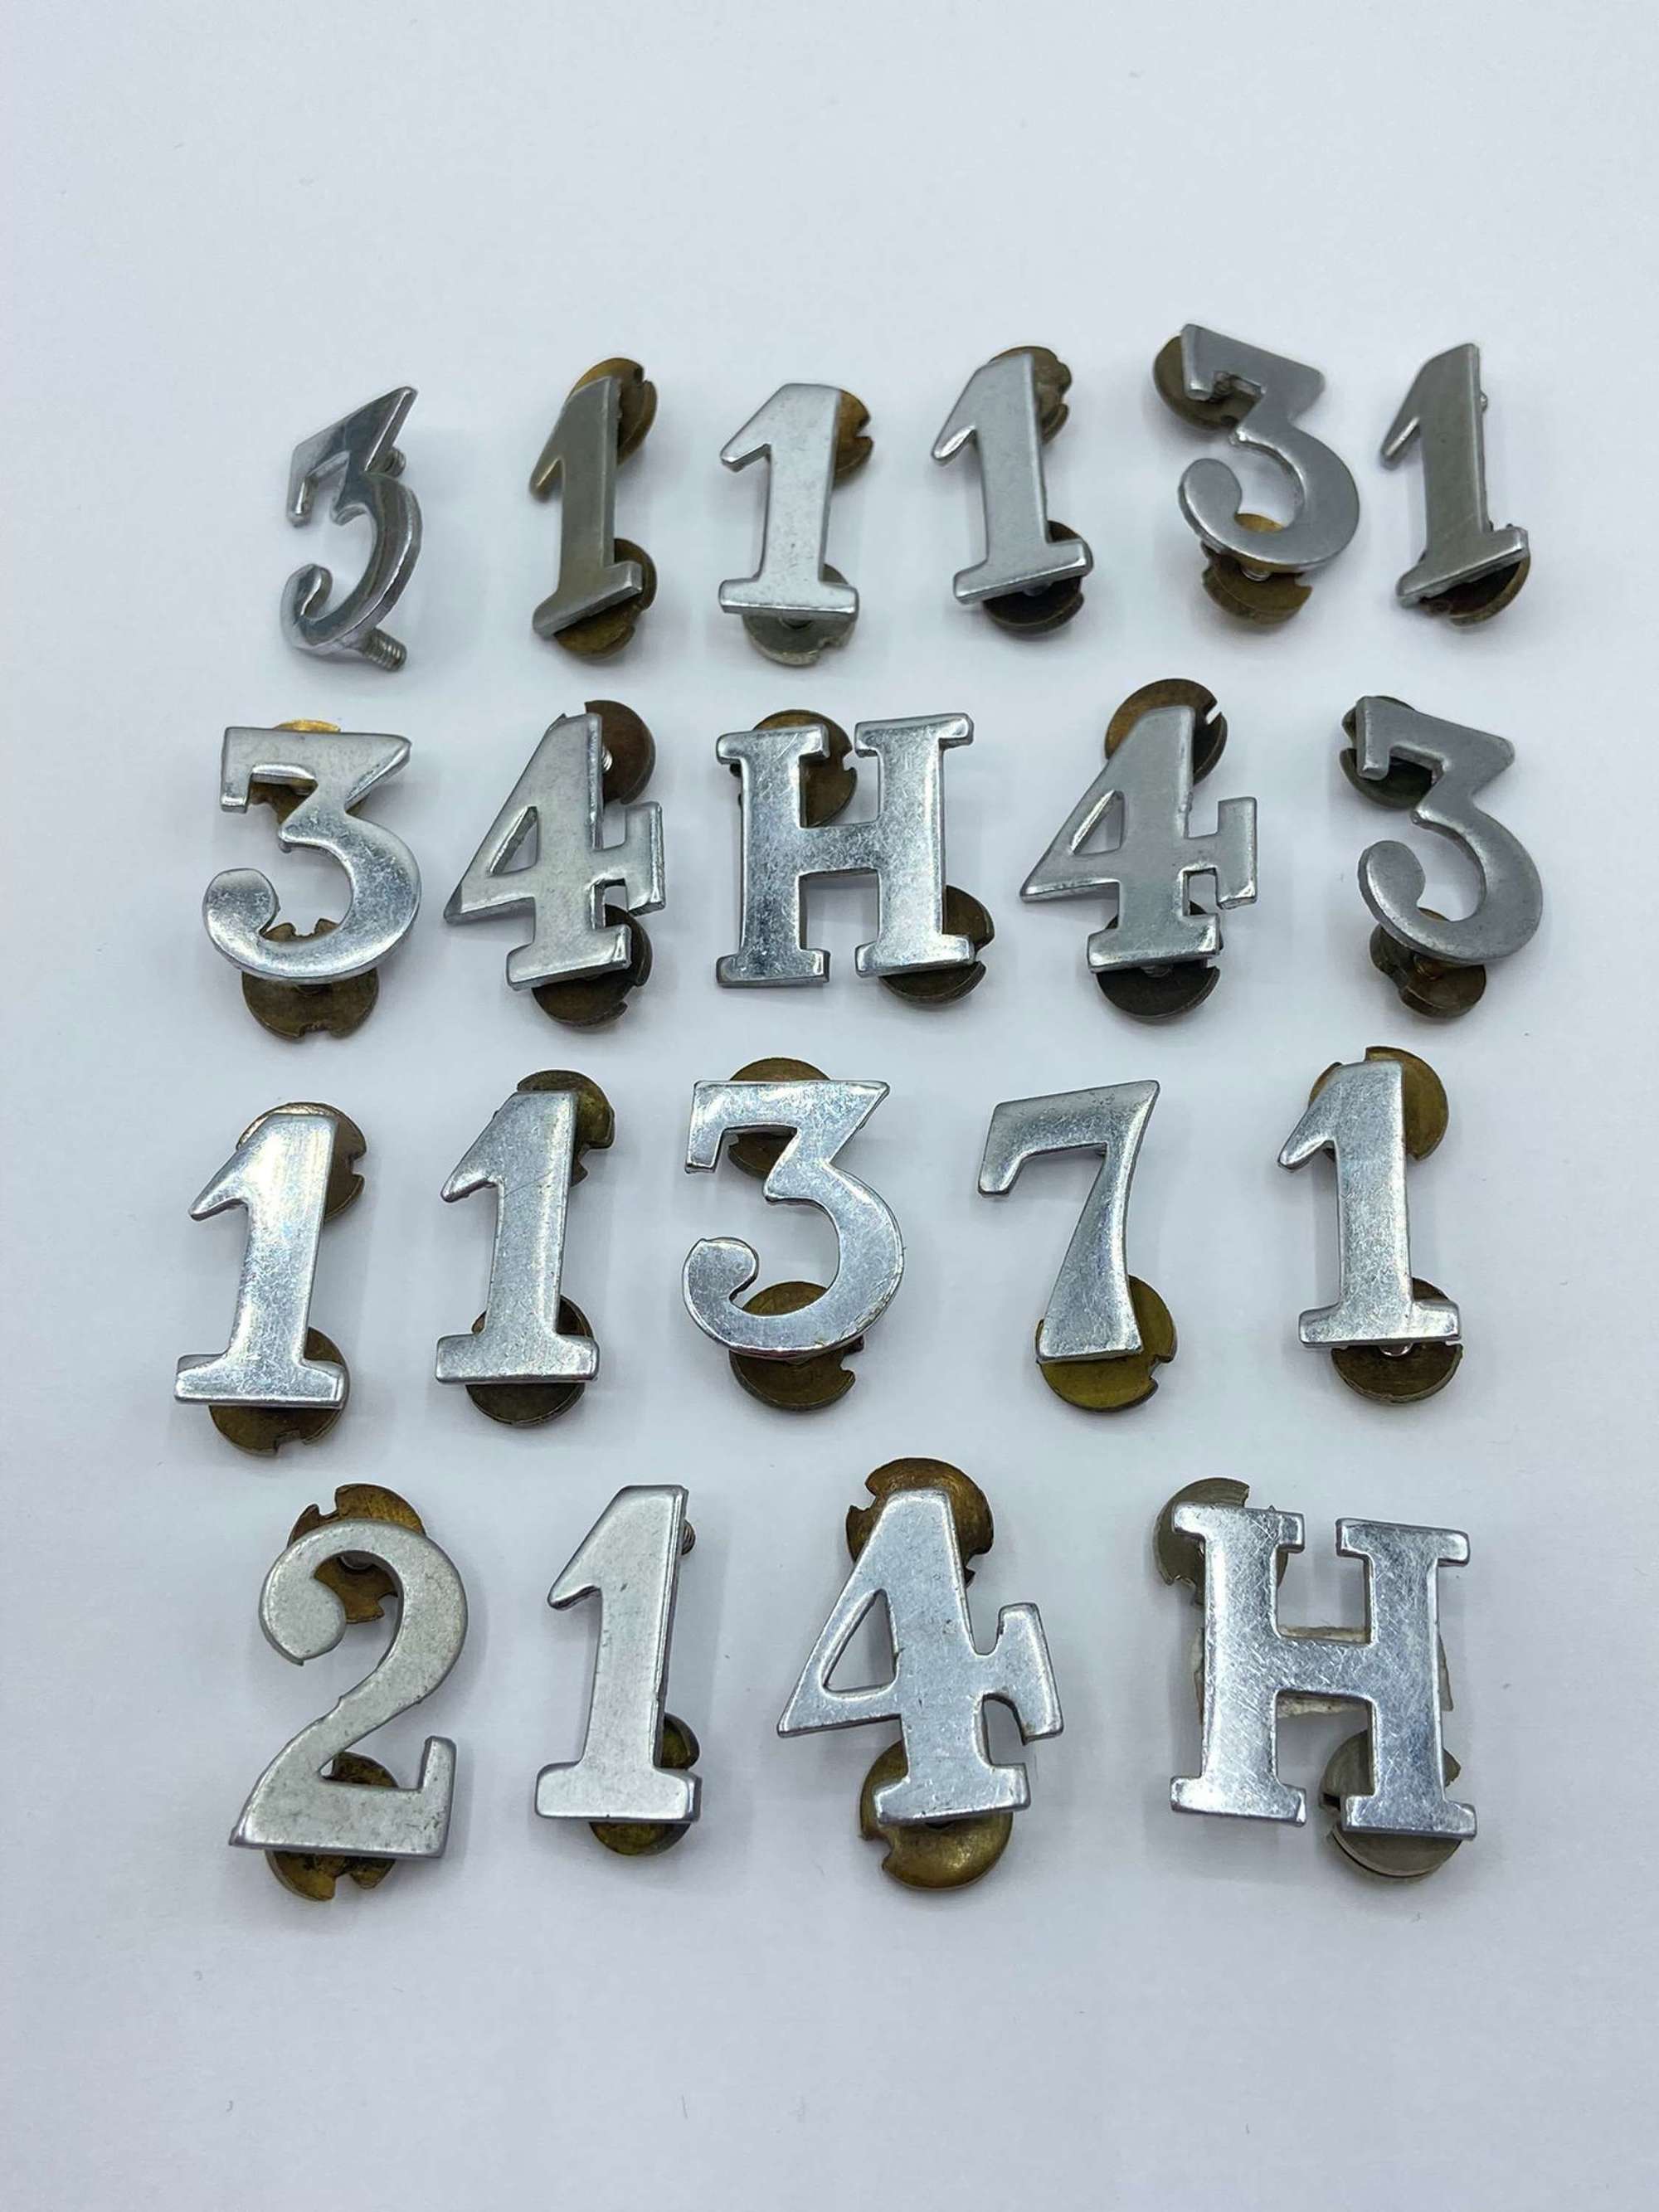 Post WW2 British Police Constable Number & Letter Insignia Badges